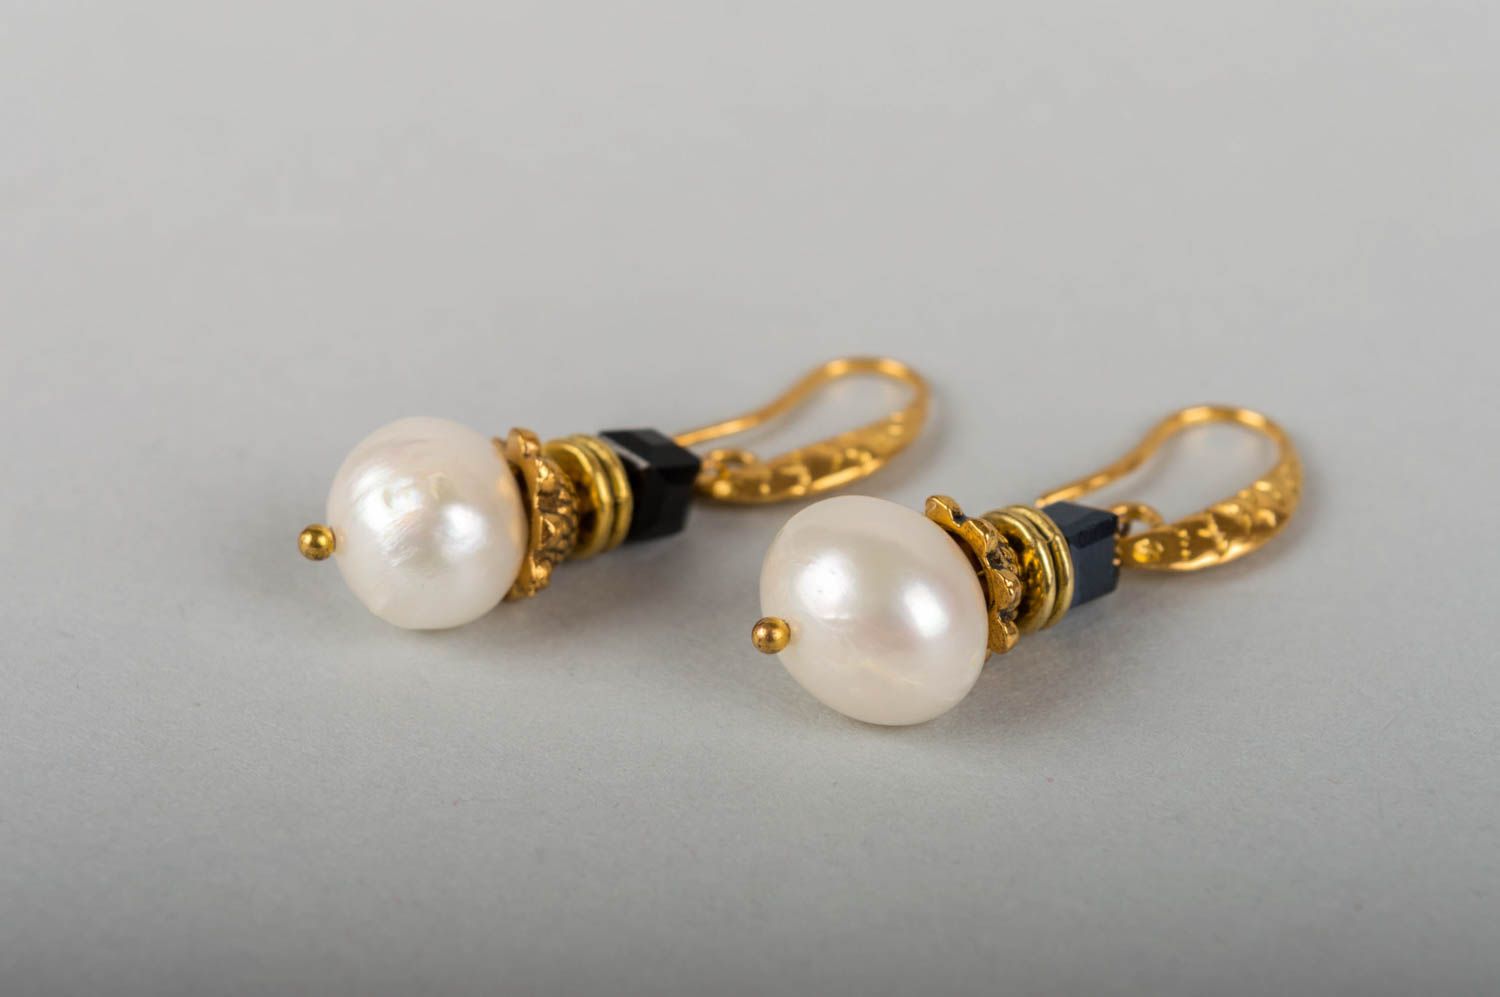 Handmade long neat latten dangling earrings with pearls and crystal glass beads photo 3